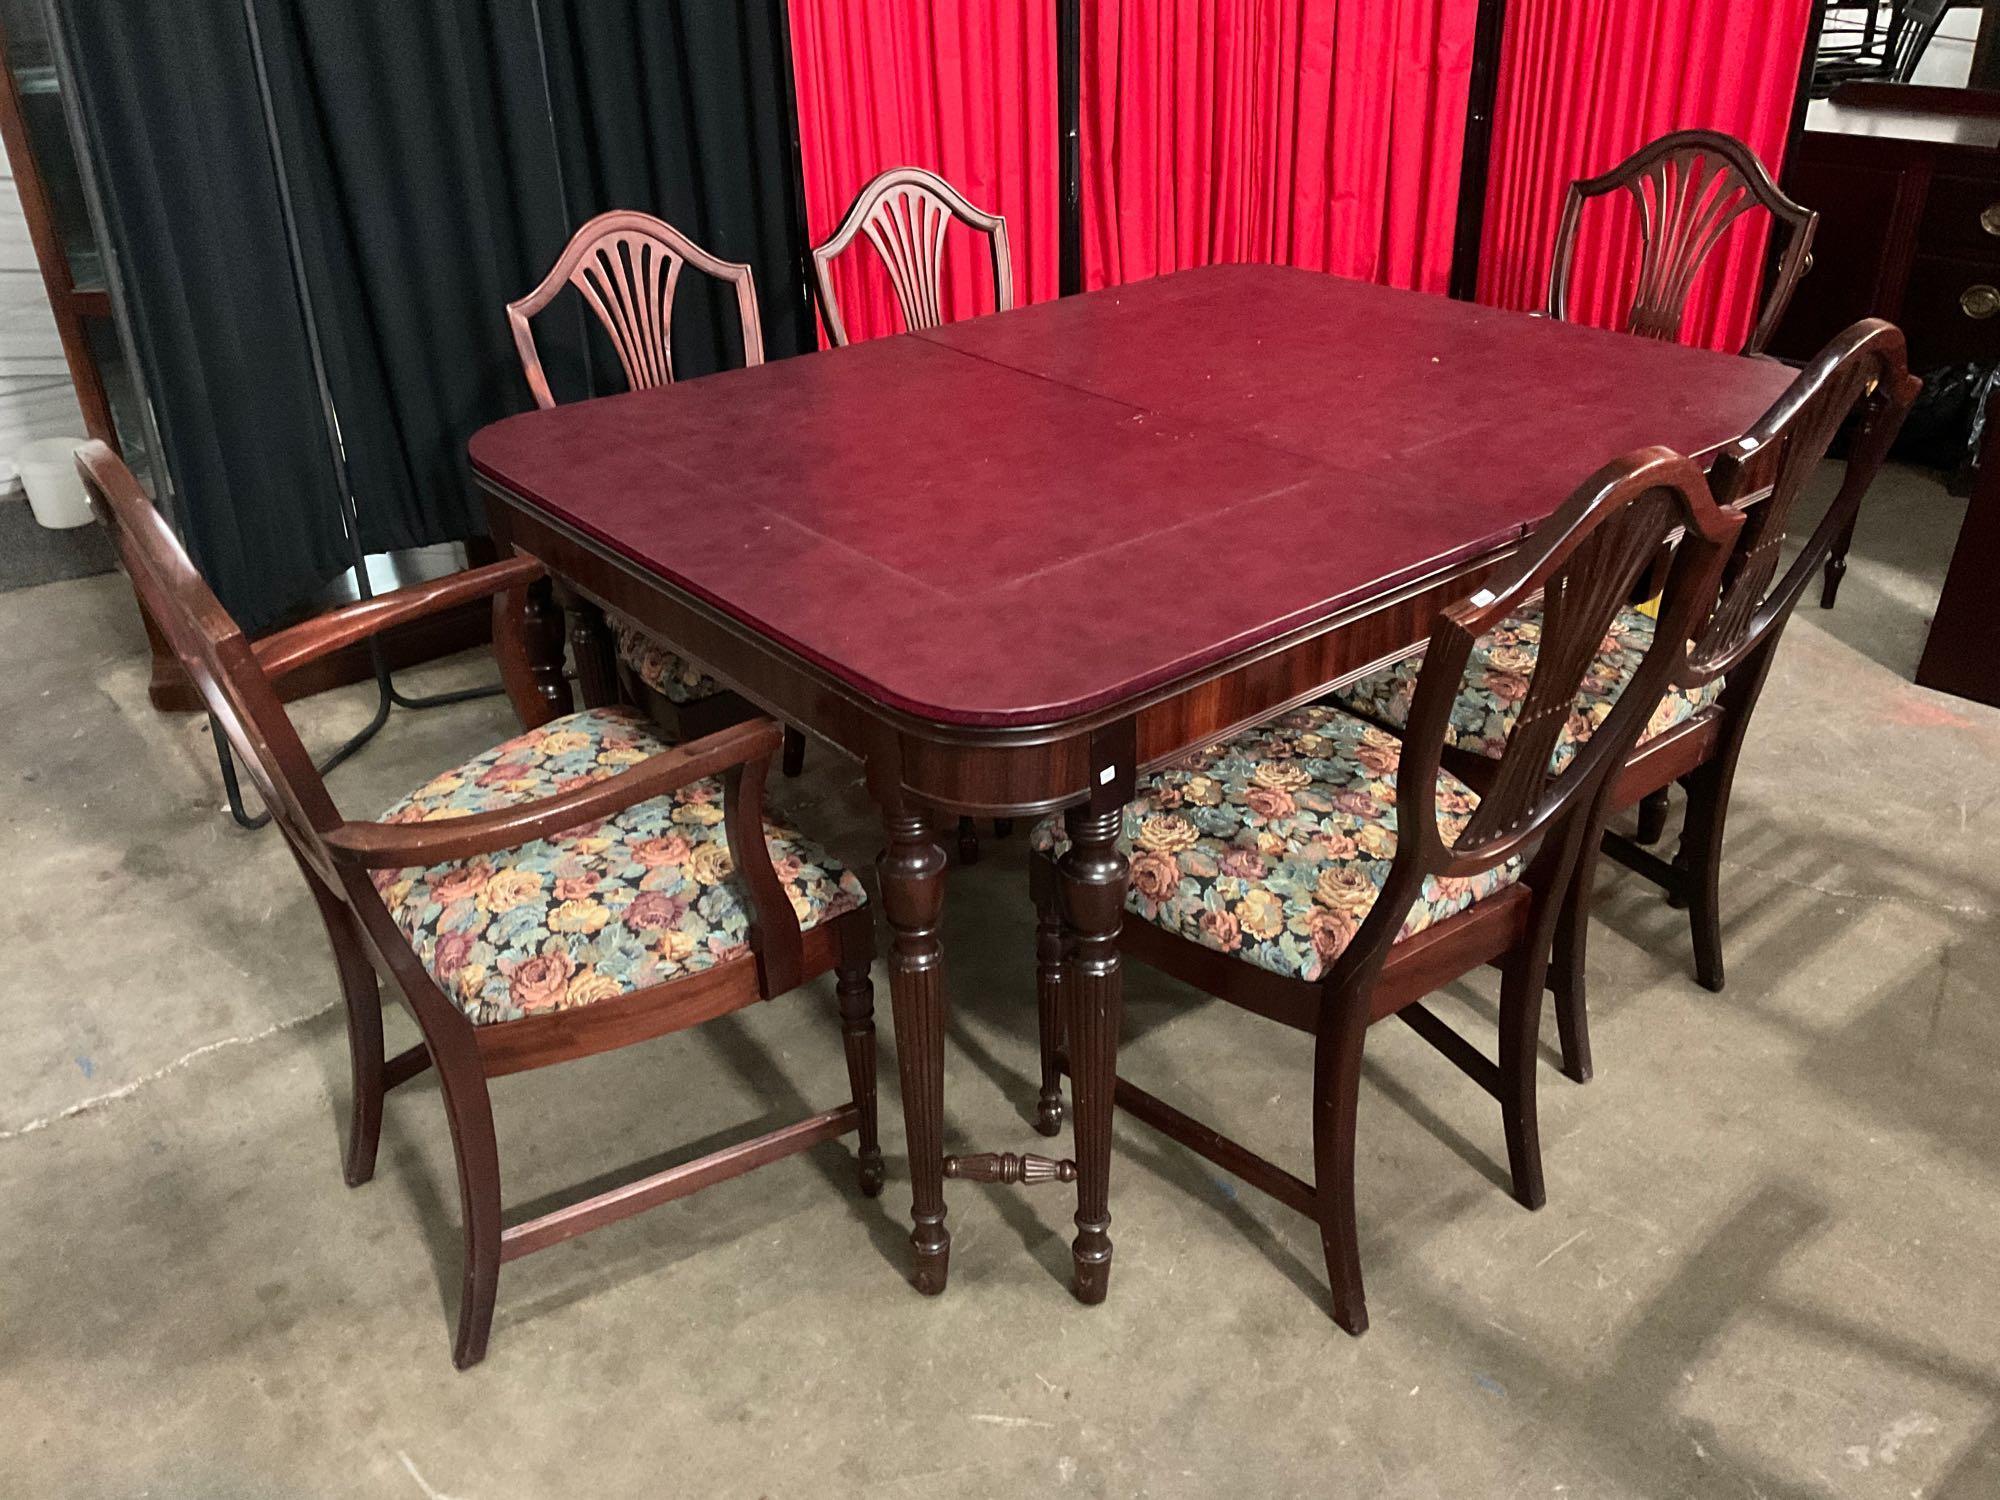 Stunning Antique Mahogany(?) Dining Table with 6 Chairs and Leaf, see desc